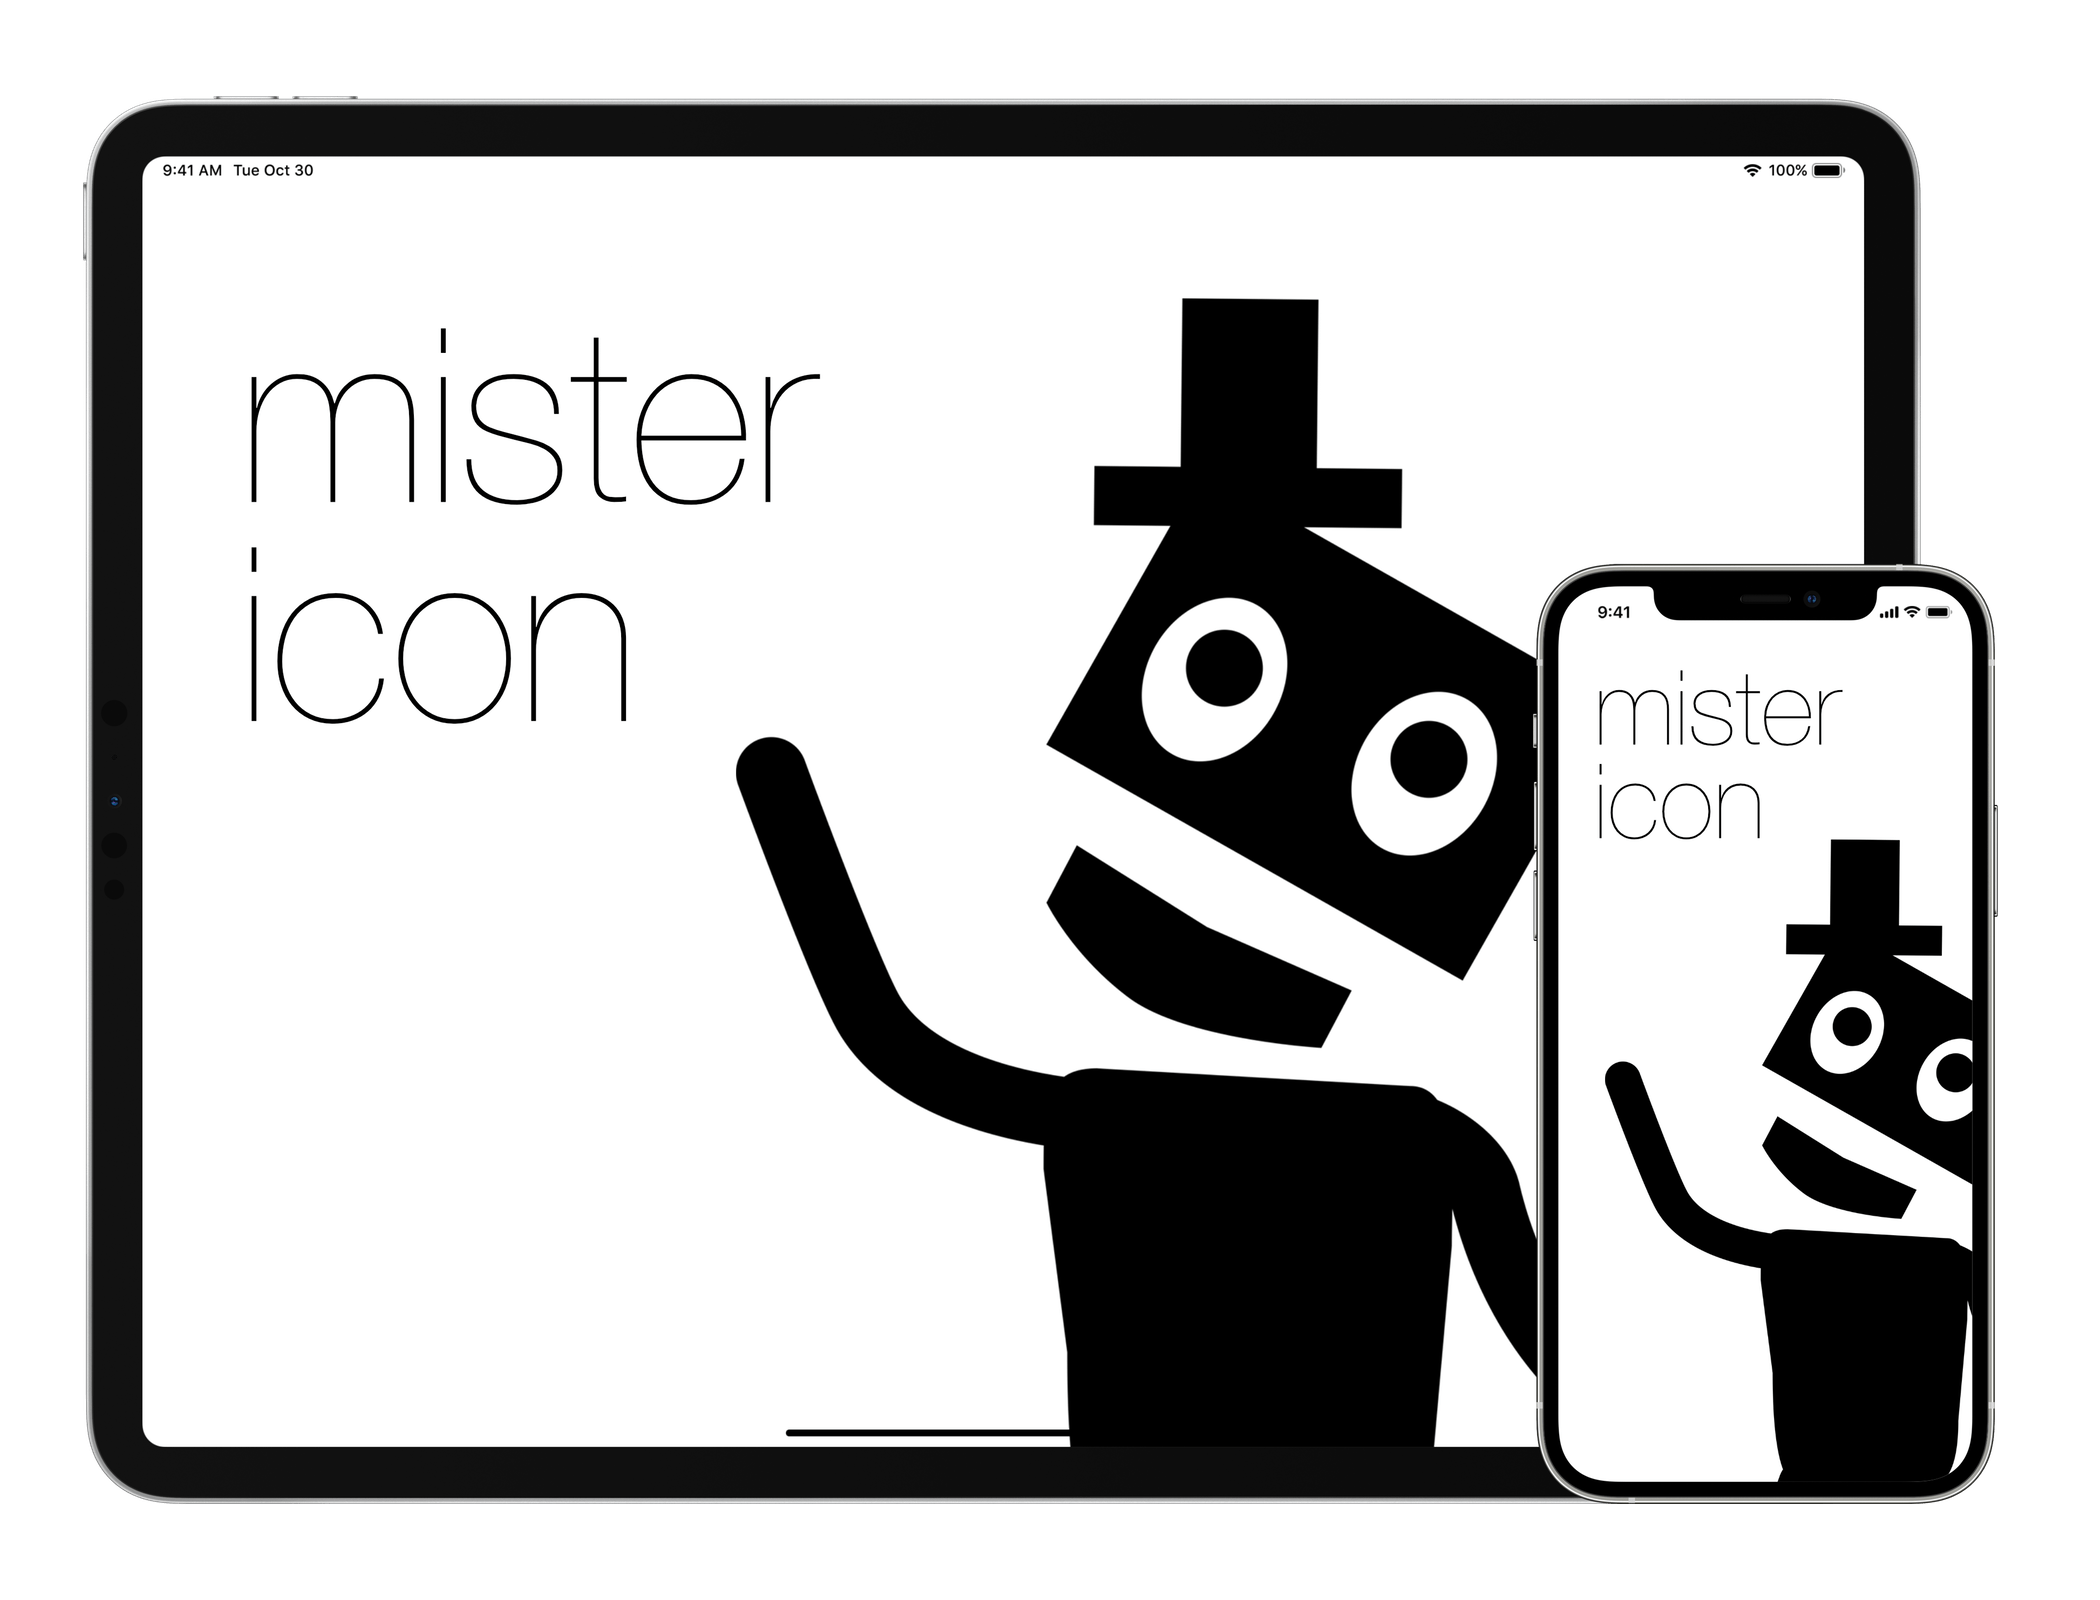 Mister Icon app running on iPhone XS and iPad Pro